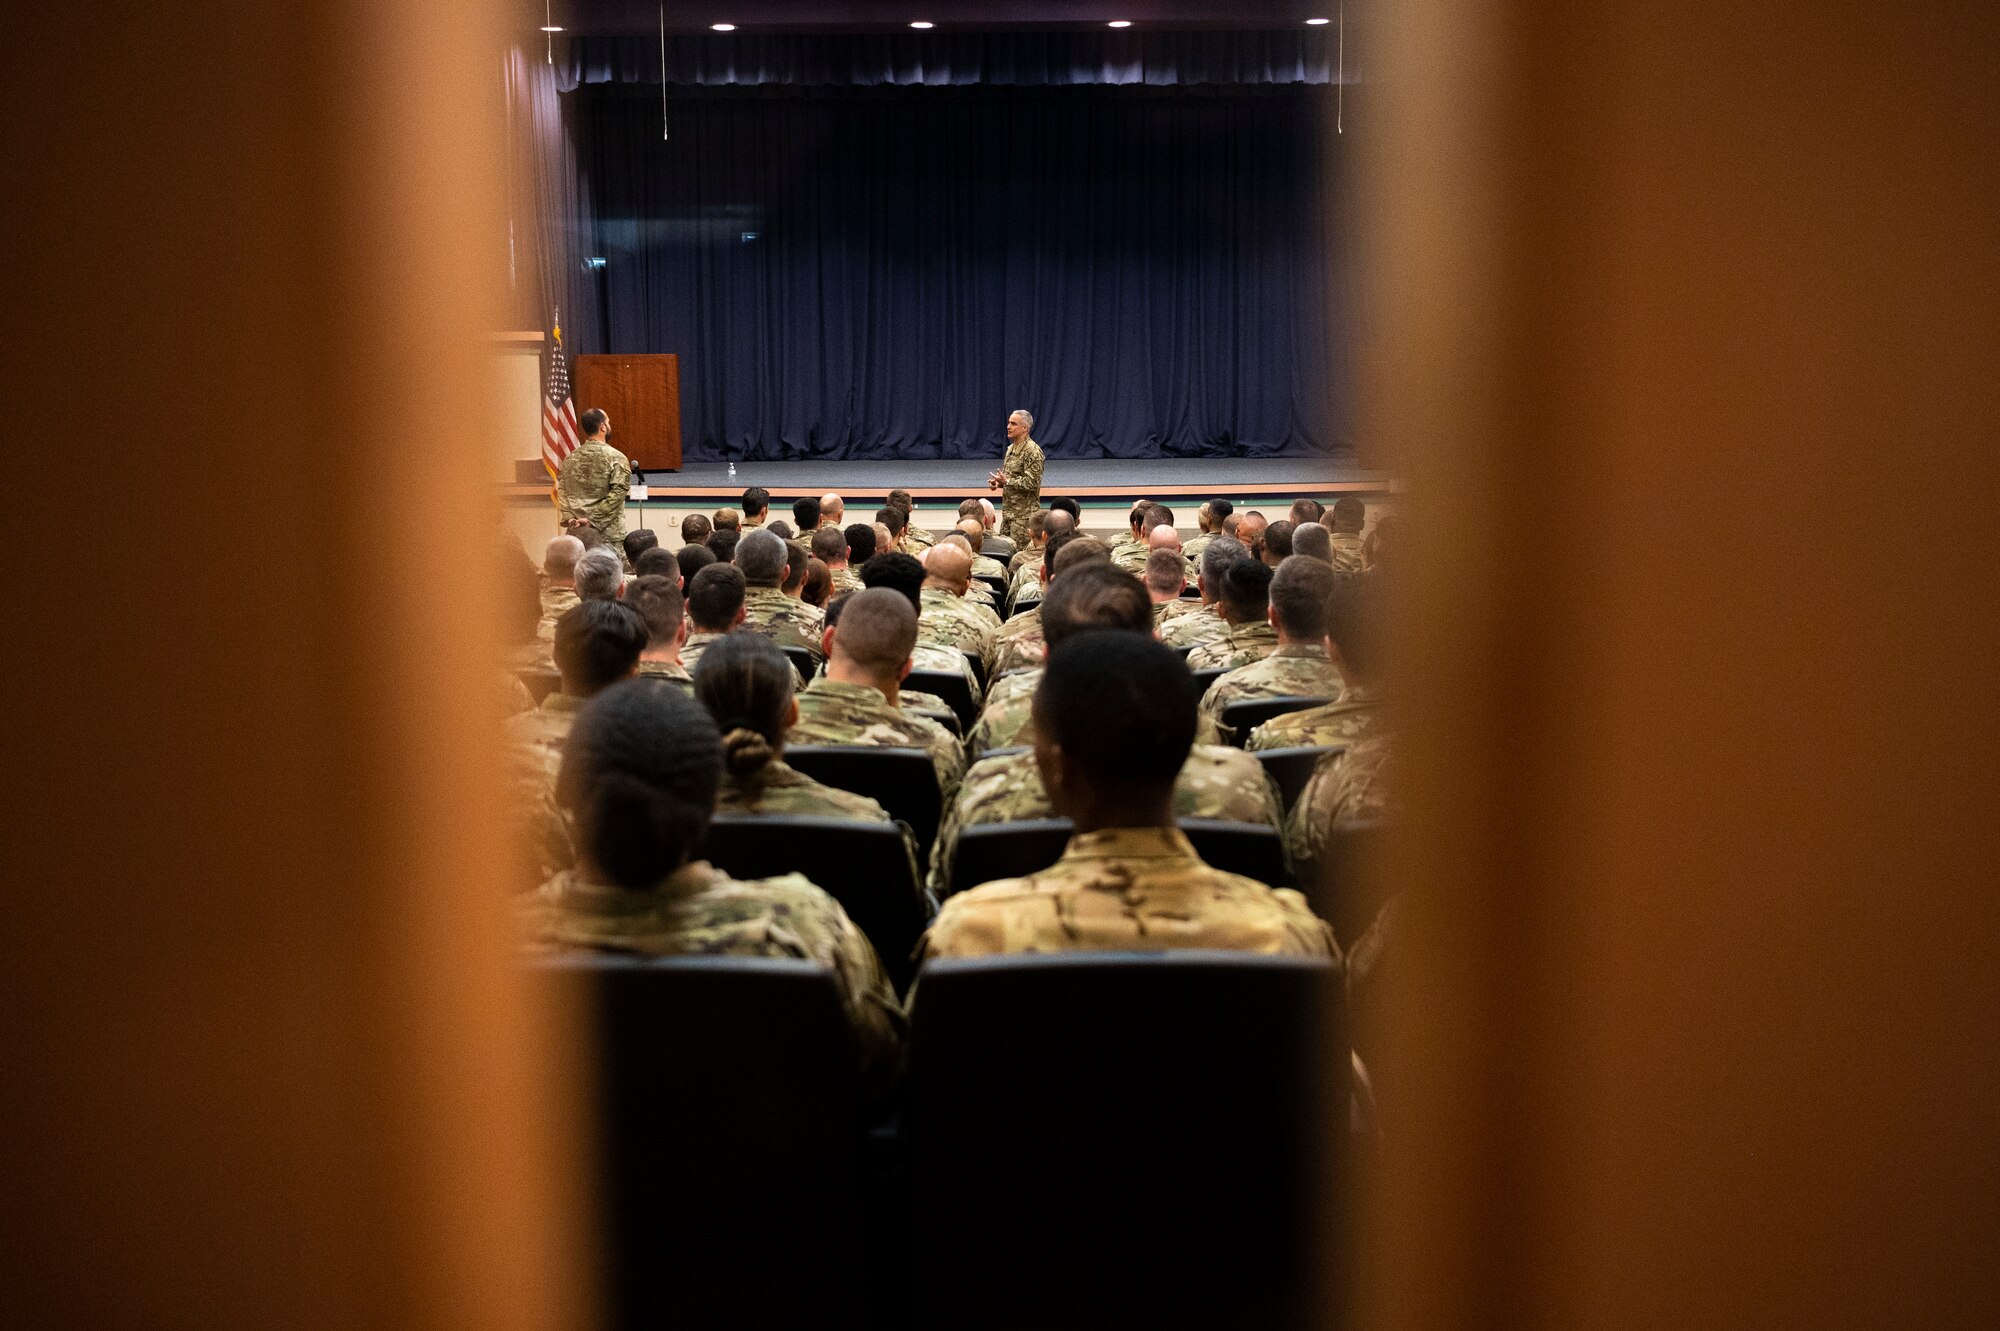 SEAC Ramón Colón-López, Senior Enlisted Advisor to the Chairman of the Joint Chiefs of Staff, addresses Airmen during an All-Call Aug. 5, 2022 at Hurlburt Field, Florida. During his visit, the SEAC attended the Talon 13 Remembrance Ceremony, visited AFSOC Headquarters and 24th Special Operations Wing, had lunch with Airmen, and hosted an All-Call. The SEAC serves as the 4th Senior Enlisted Advisor to the Chairman of the Joint Chiefs of Staff, the most senior enlisted service member, by position, in the United States Armed Forces, and the principal military advisor to the Chairman on all matters involving joint and combined total force integration, utilization, health of the force, and joint development for enlisted personnel.